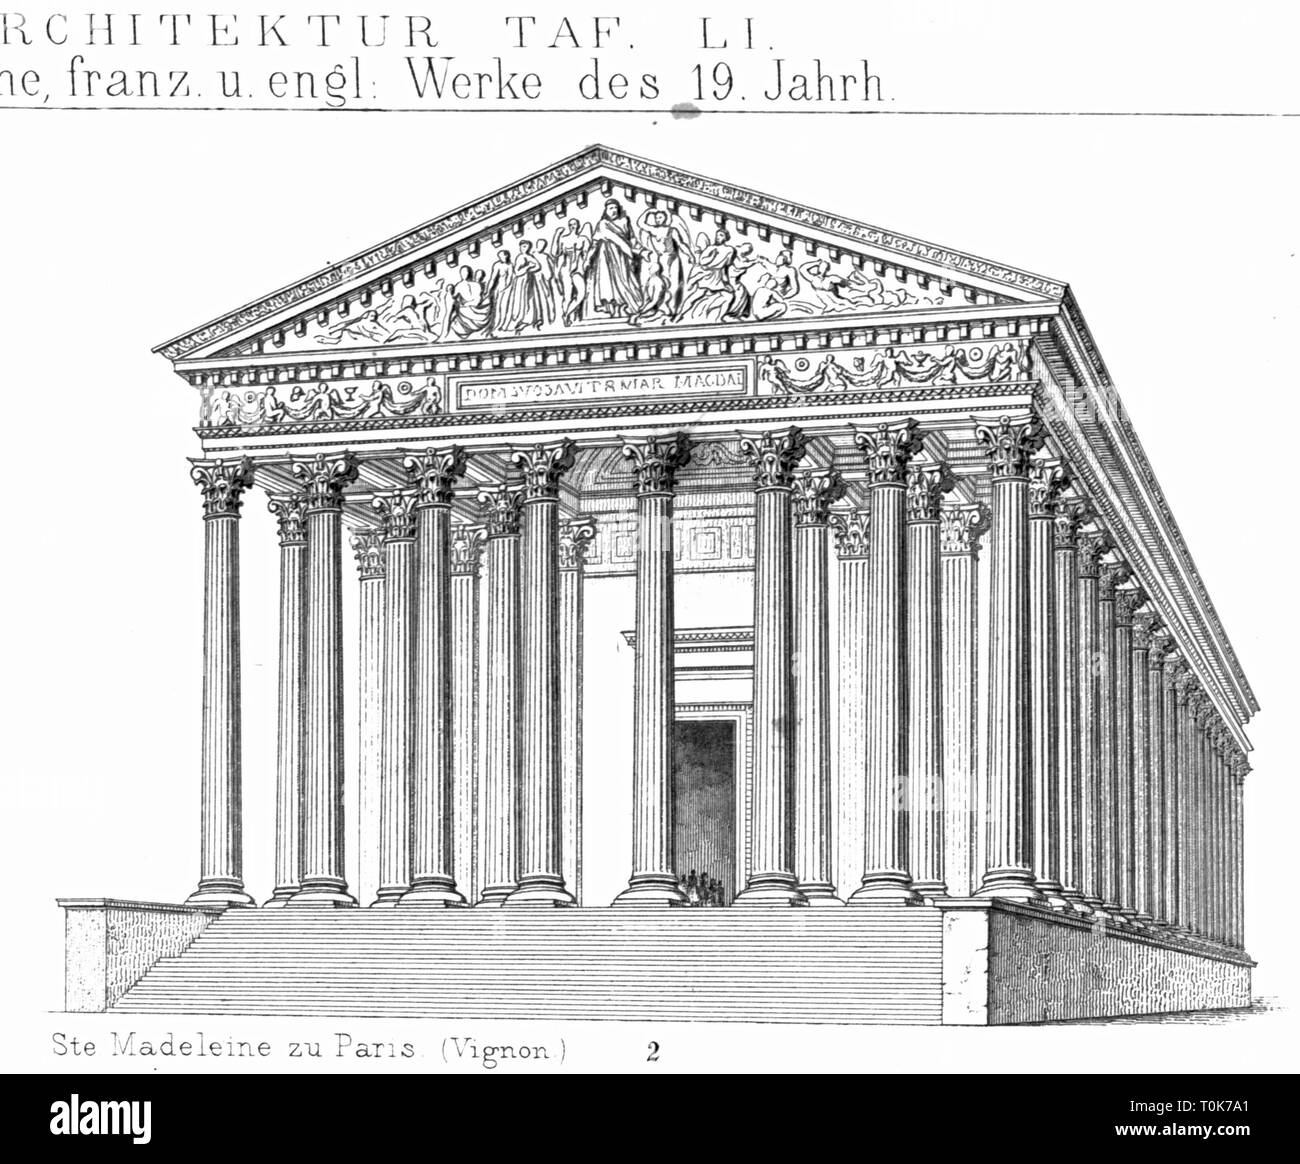 geography / travel, France, Paris, churches, Madeleine Church (Eglise de la Madelaine), built 1763 - 1842, exterior view, illustration from 'Denkmaeler der Kunst' (Monuments of Art), by Wilhelm Luebke and Carl von Luetzow, 3rd edition, Stuttgart 1879, volume 2, steel engraving by H. Gugeler, after drawing by Wilhelm Riefstahl, chapter on architecture, plate LI, architecture, buildings, building, architecture, 19th century, historic, historical, Denkmaler, Denkmäler, Lübke, Lubke, Lützow, Lutzow, Additional-Rights-Clearance-Info-Not-Available Stock Photo